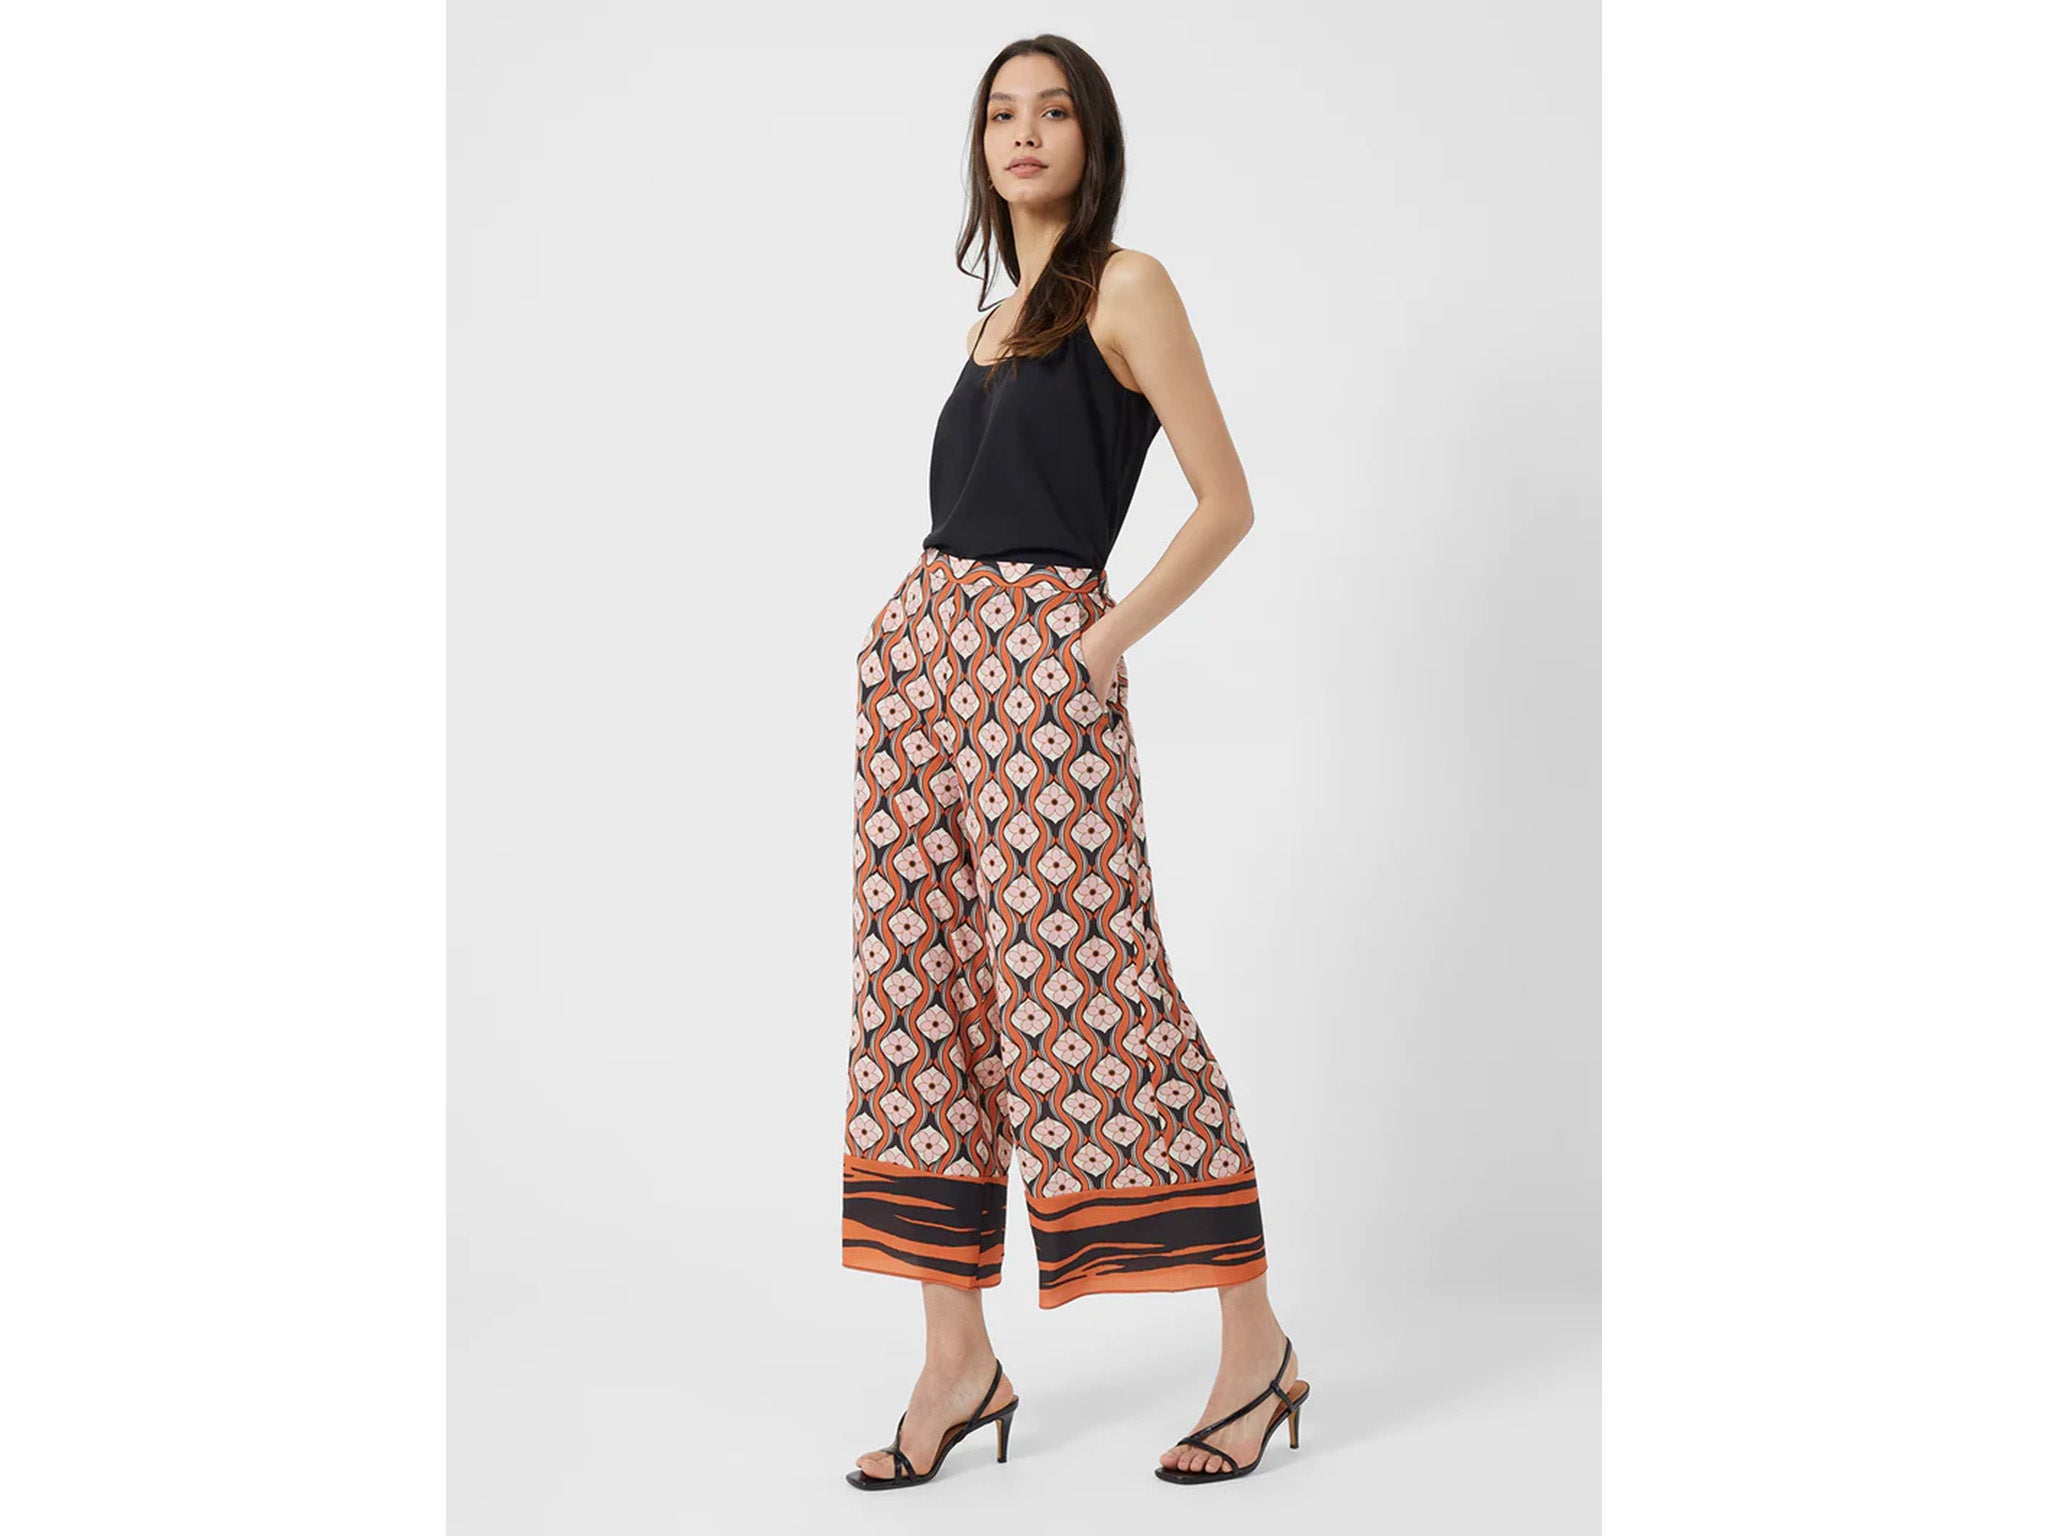 French Connection Arabelle Delphine culotte trousers